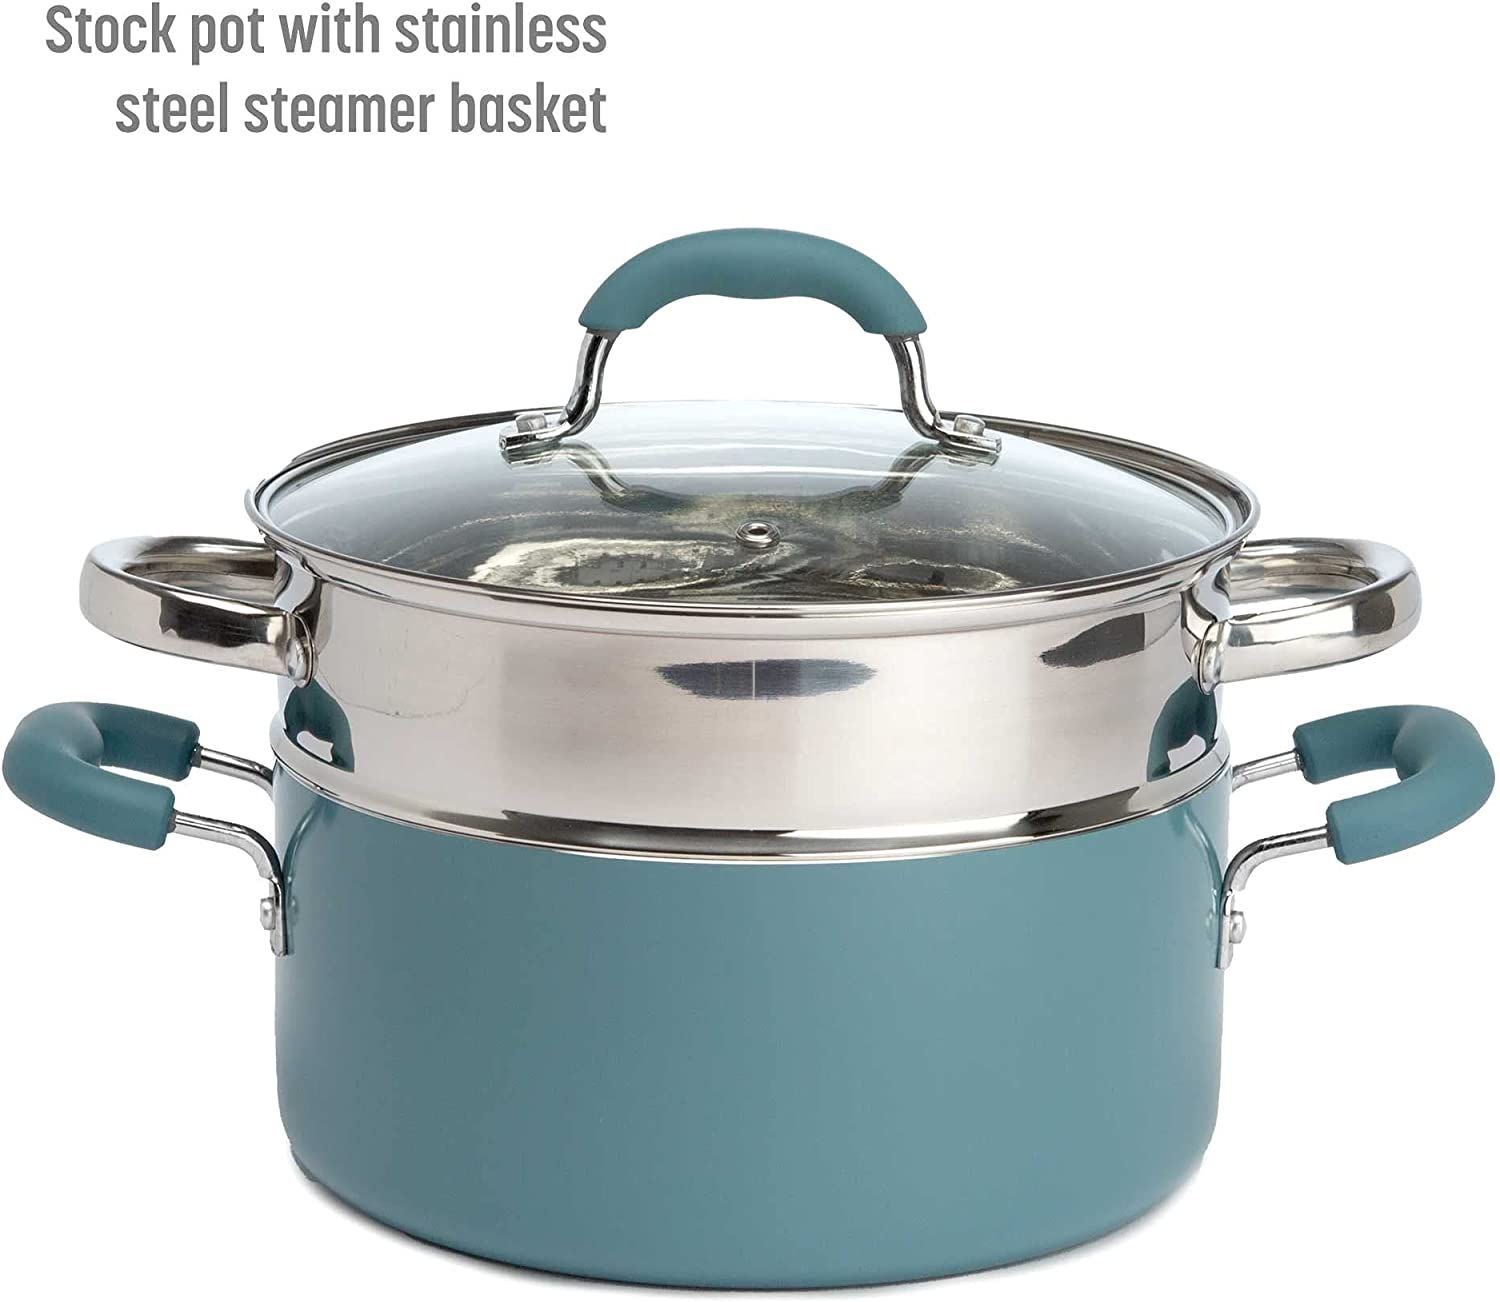 Goodful Cookware Set with Premium Non-Stick Coating, Dishwasher Safe Pots  and Pans, Tempered Glass Steam Vented Lids, Stainless Steel Steamer, and  Bamboo Cooking Utensils Set, 12-Piece, Turquoise, Everything Else on  Carousell